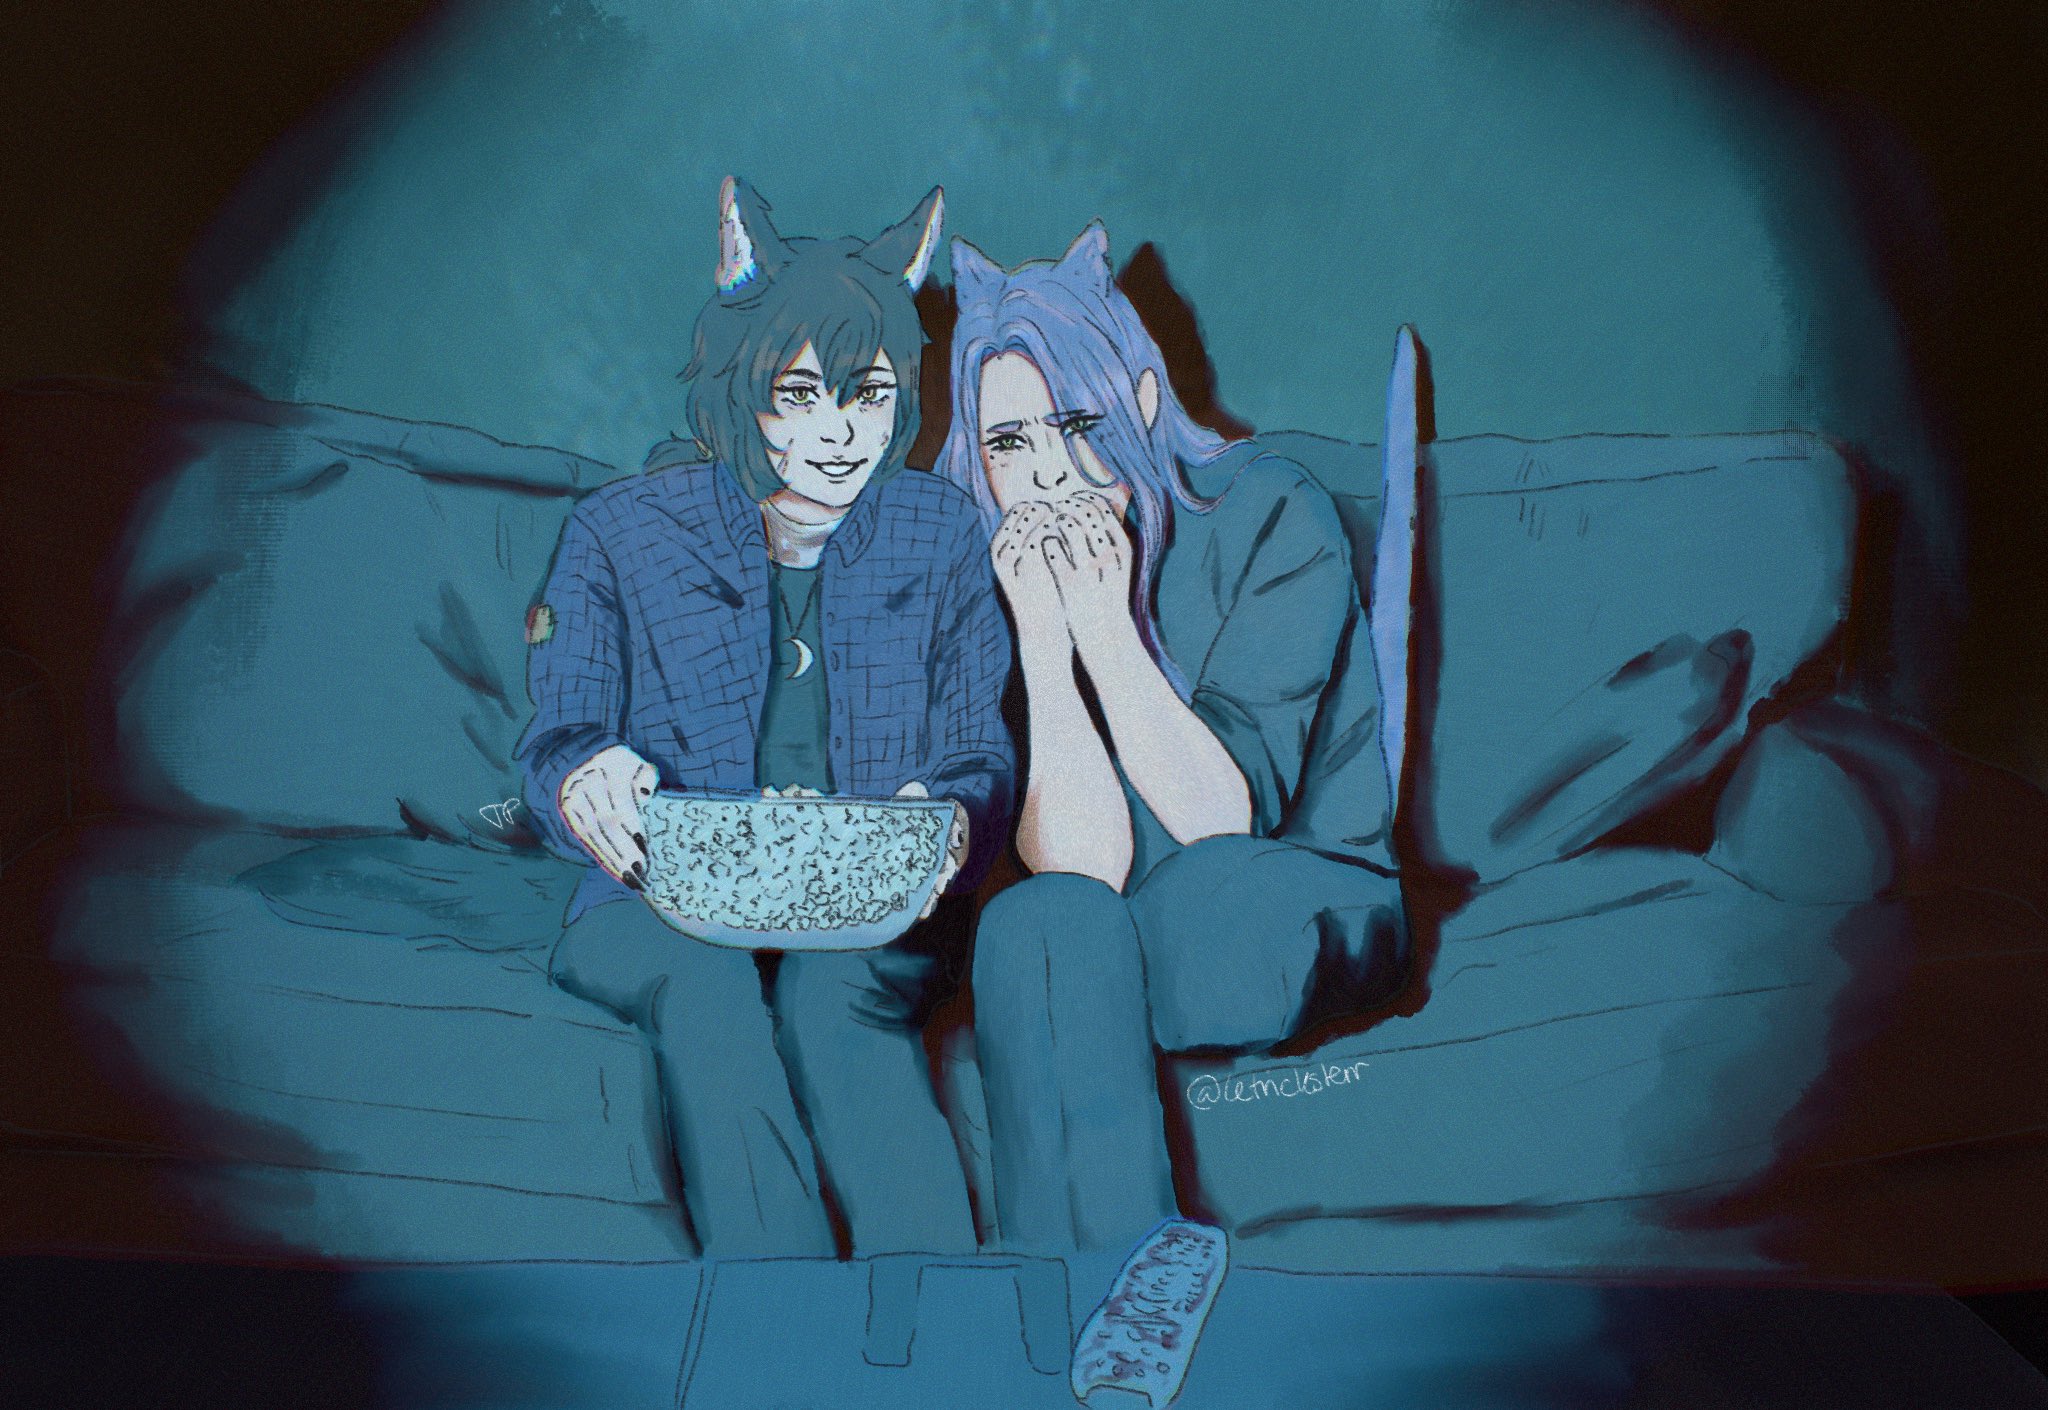 A drawing of two original characters, Valentine and Sable, sitting on a couch together watching a horror movie. Sable has cat ears and long shaggy hair pulled into a ponytail, they are wearing a patched plaid shirt and watching the movie eagerly. Valentine has cat ears, long purple hair, and is wearing dark chic clothing. He is watching the movie fearfully, his tail sticking straight in the air. The scene is lit cooly by the tv.